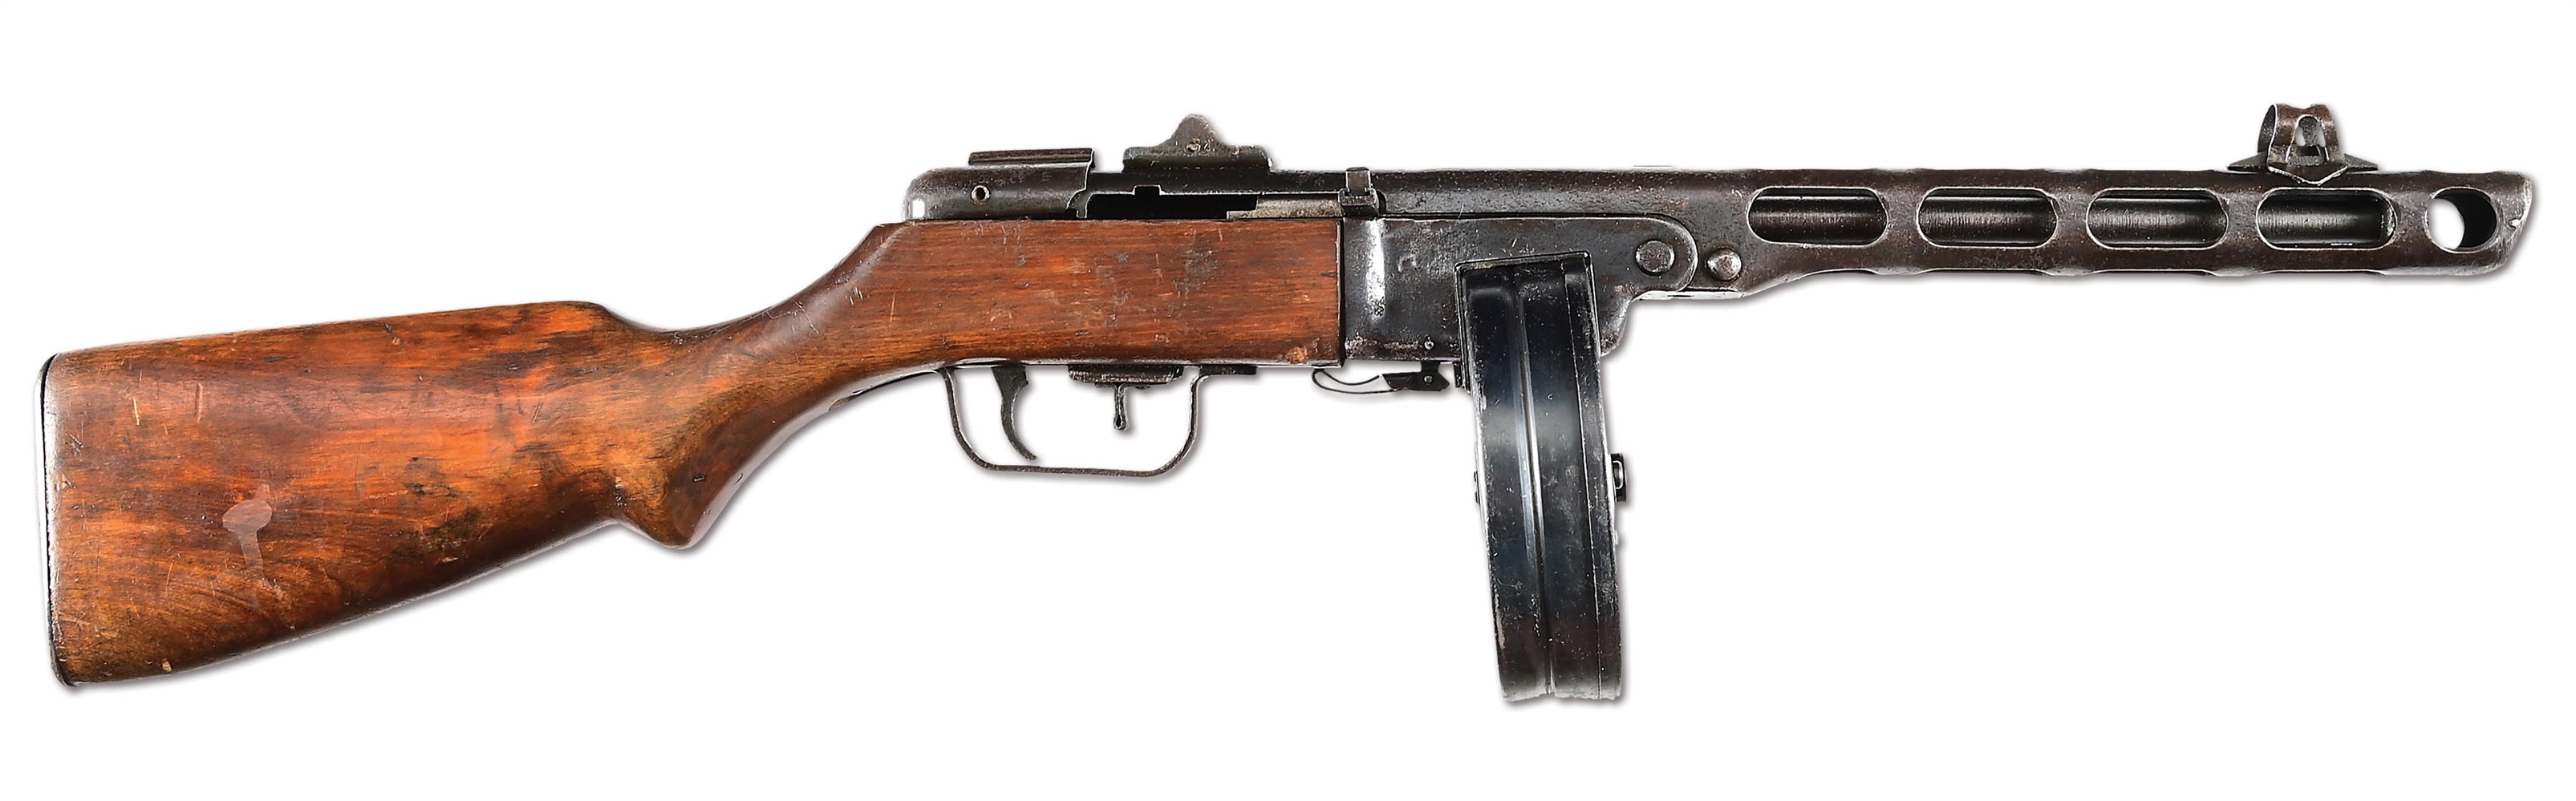 (N) SOUGHT AFTER RUSSIAN WORLD WAR II "1944" DATED PPSH-41 SUBMACHINE GUN WITH SPARE DRUM MAGAZINES (CURIO & RELIC).